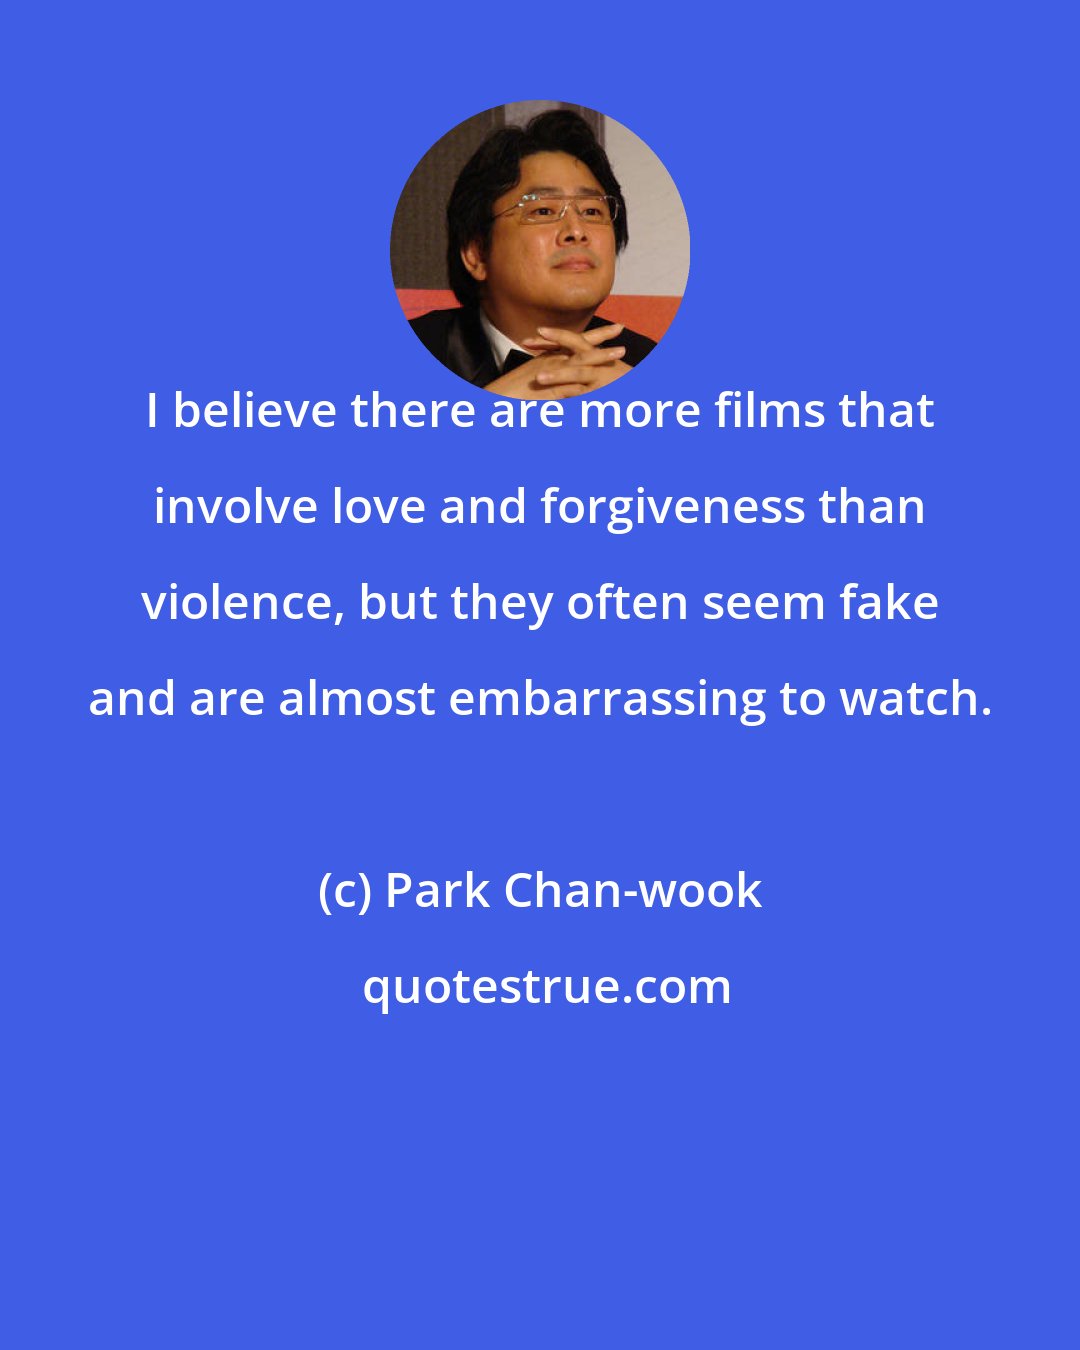 Park Chan-wook: I believe there are more films that involve love and forgiveness than violence, but they often seem fake and are almost embarrassing to watch.